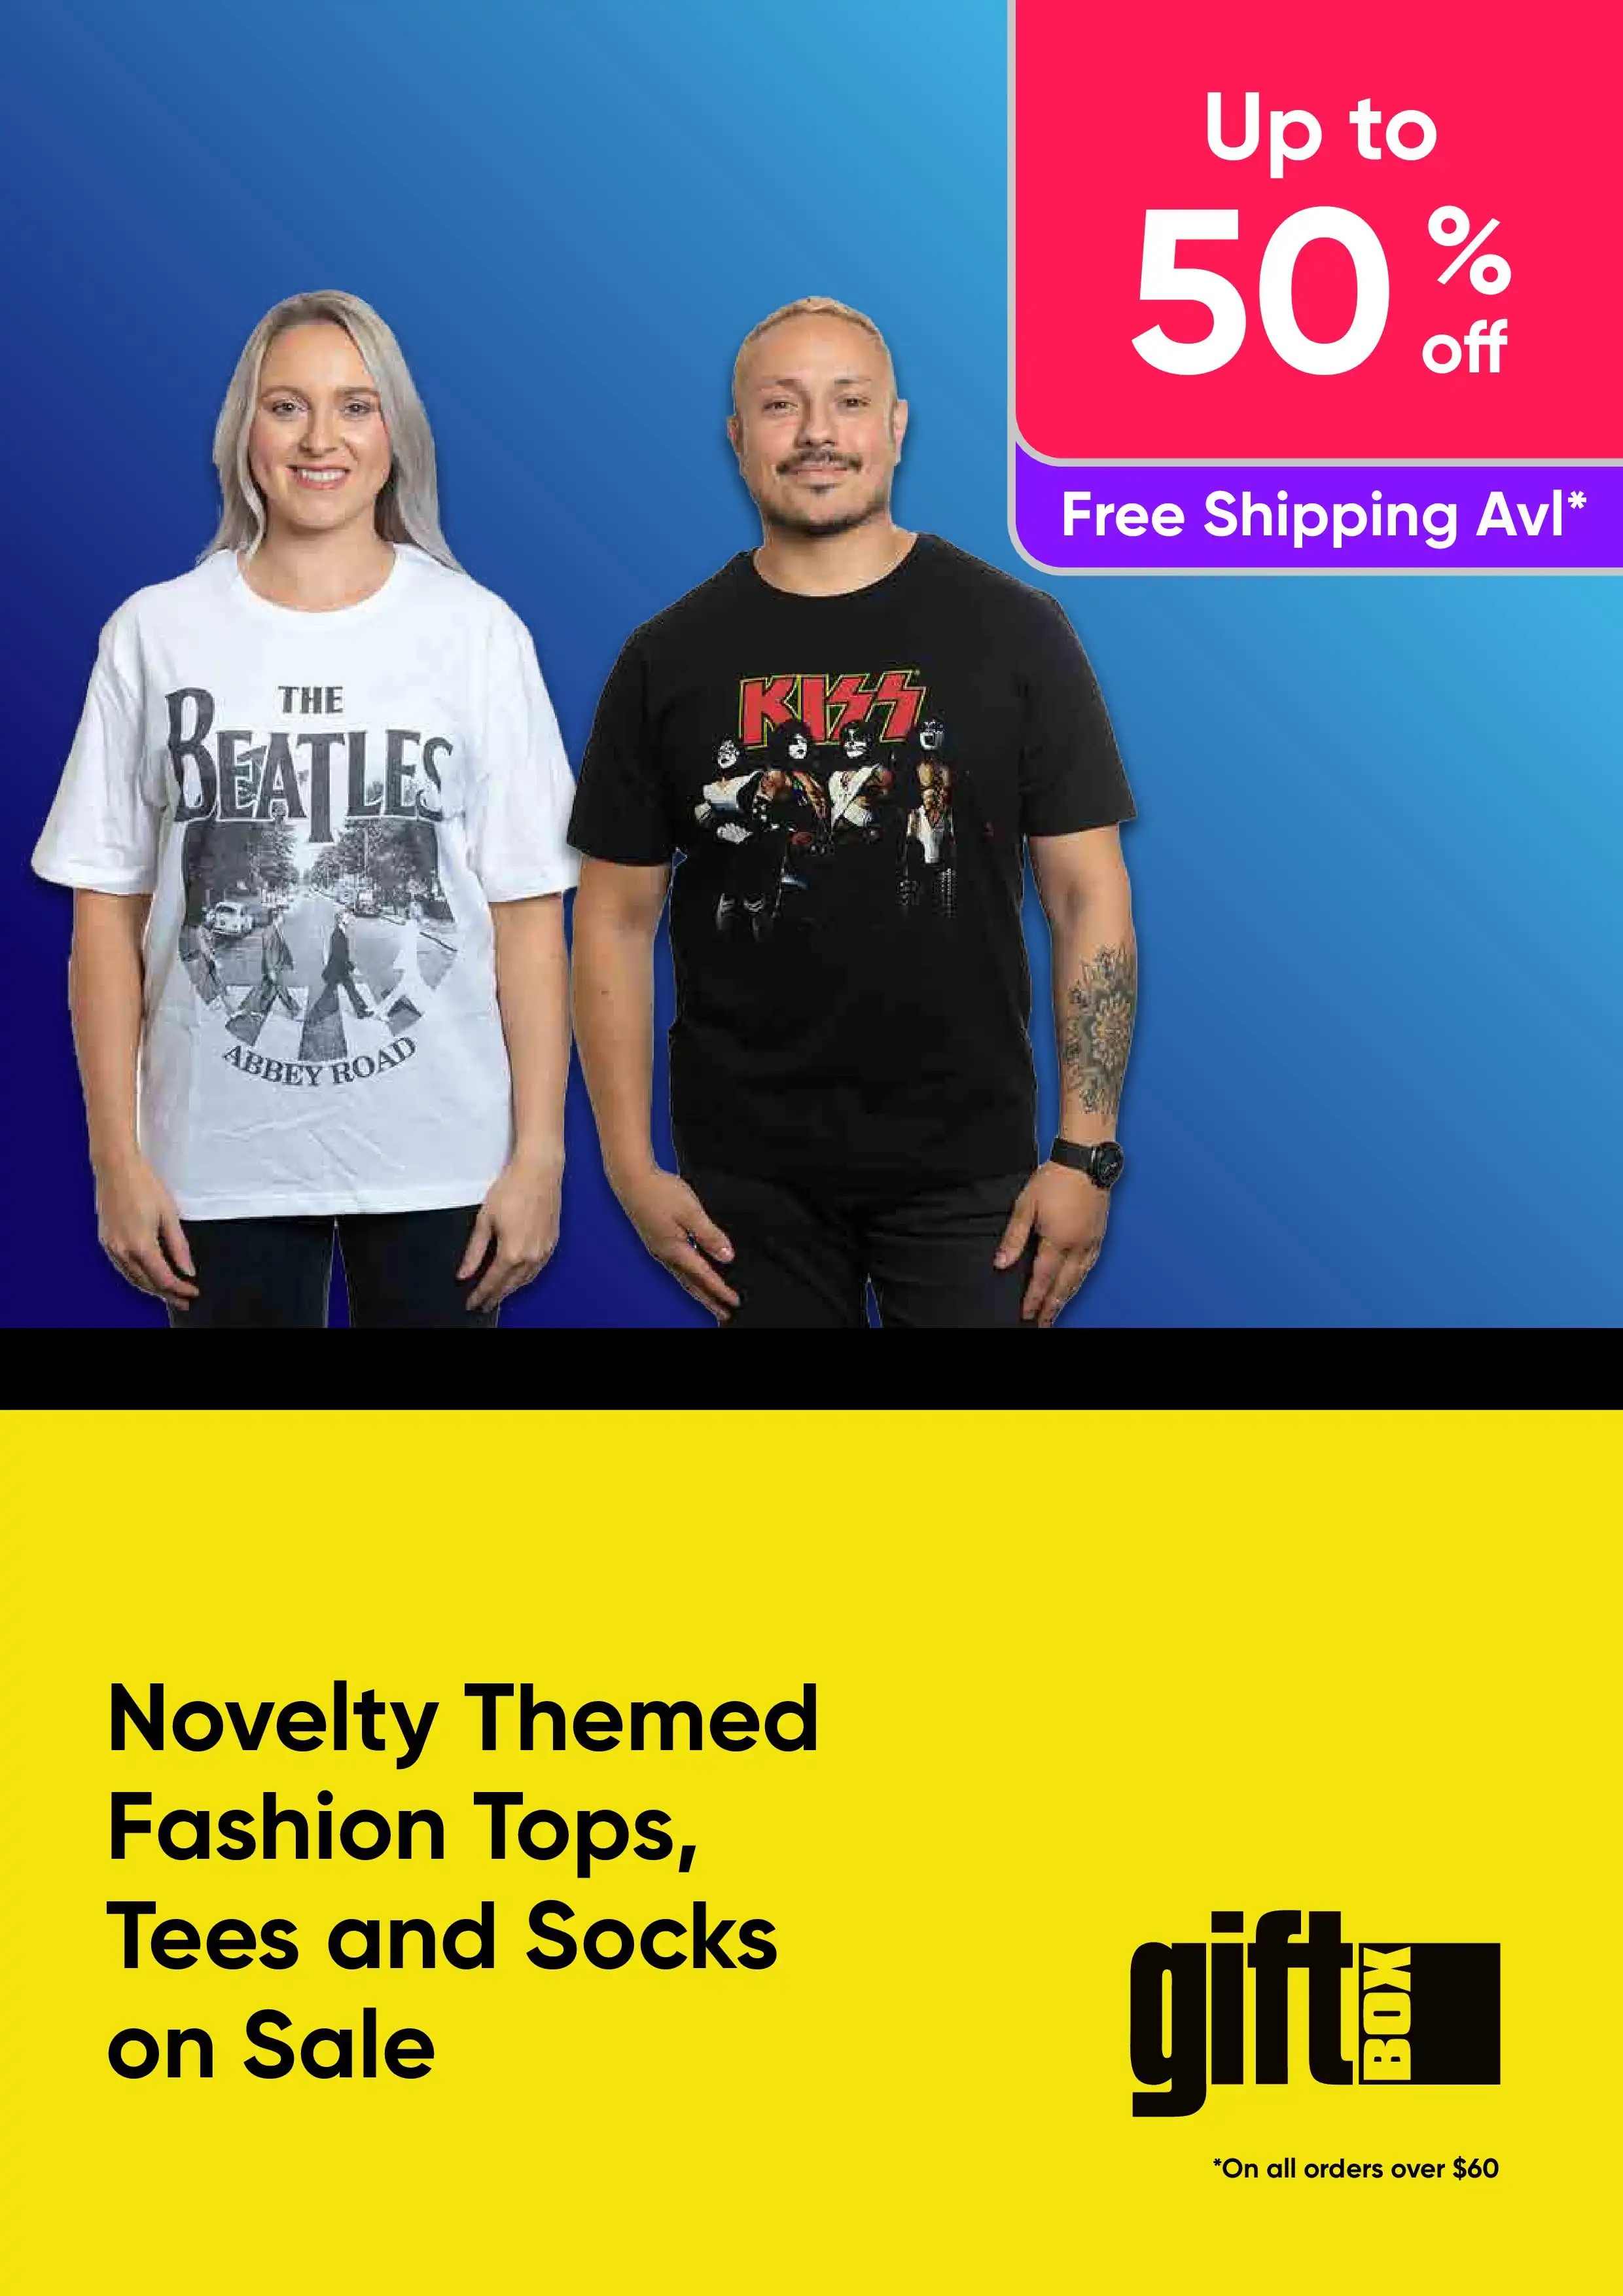 Novelty Themed Fashion Tops, Tees and Socks on Sale - Up to 50% off